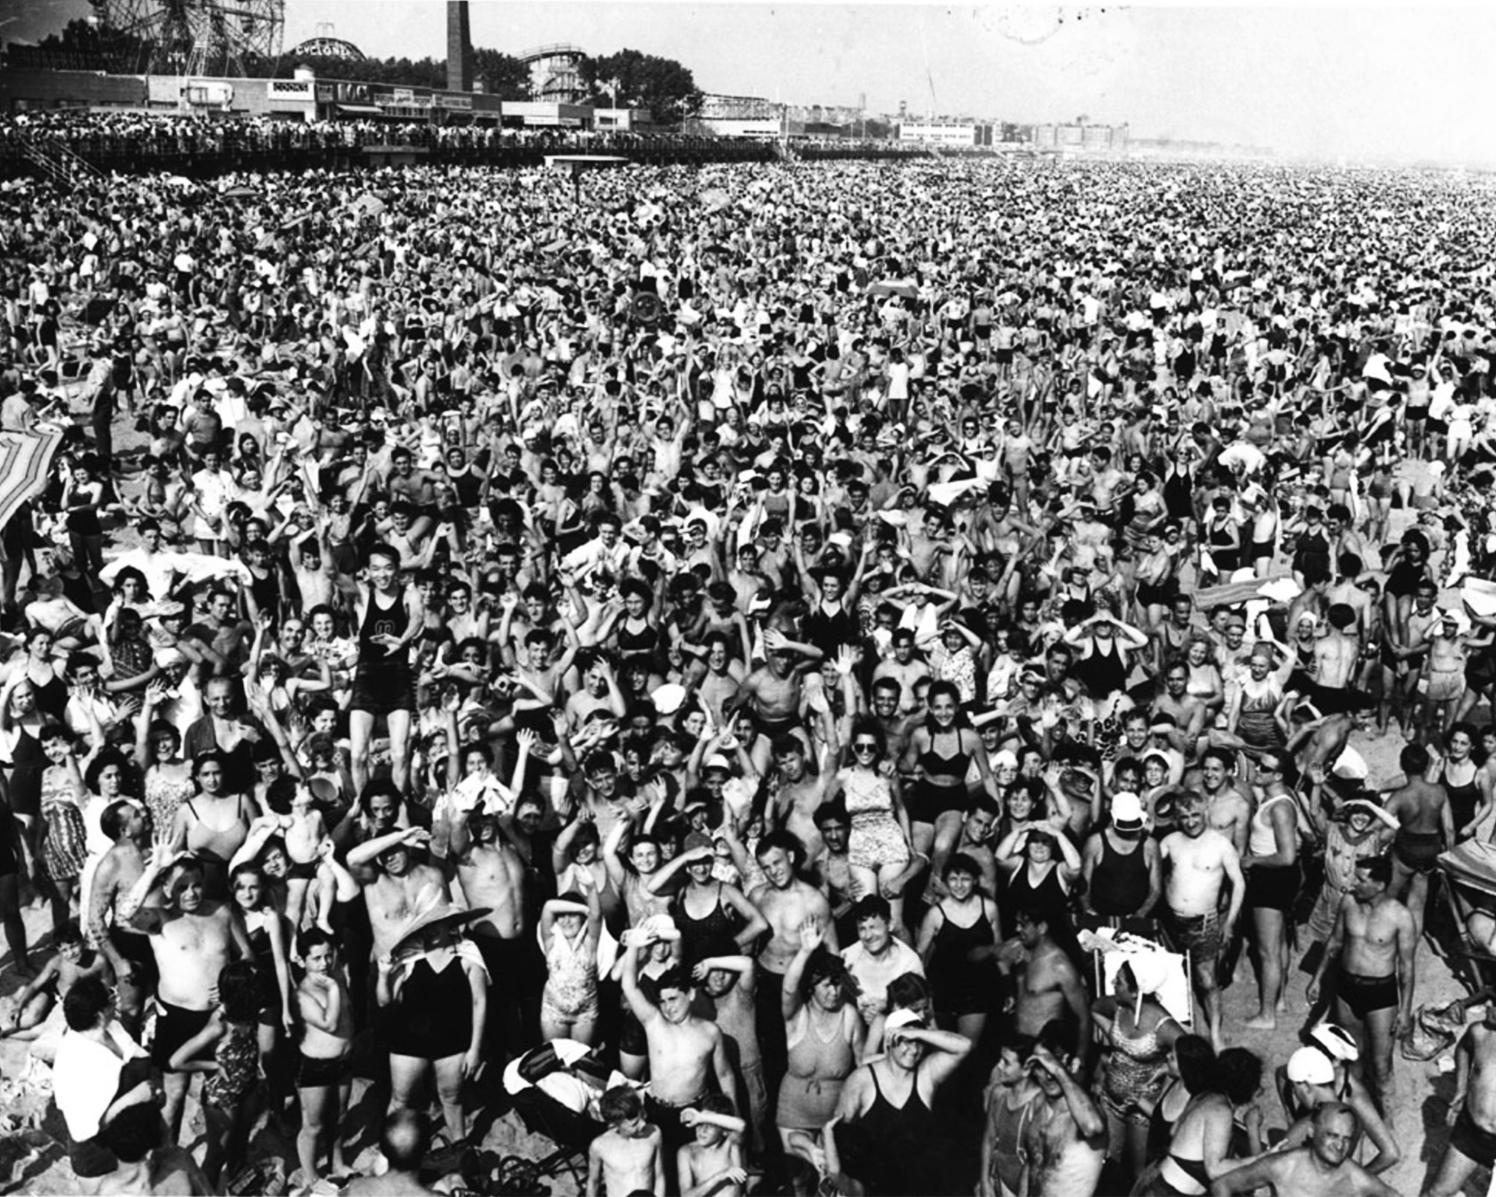 Afternoon Crowd at Coney Island - Photograph by Weegee